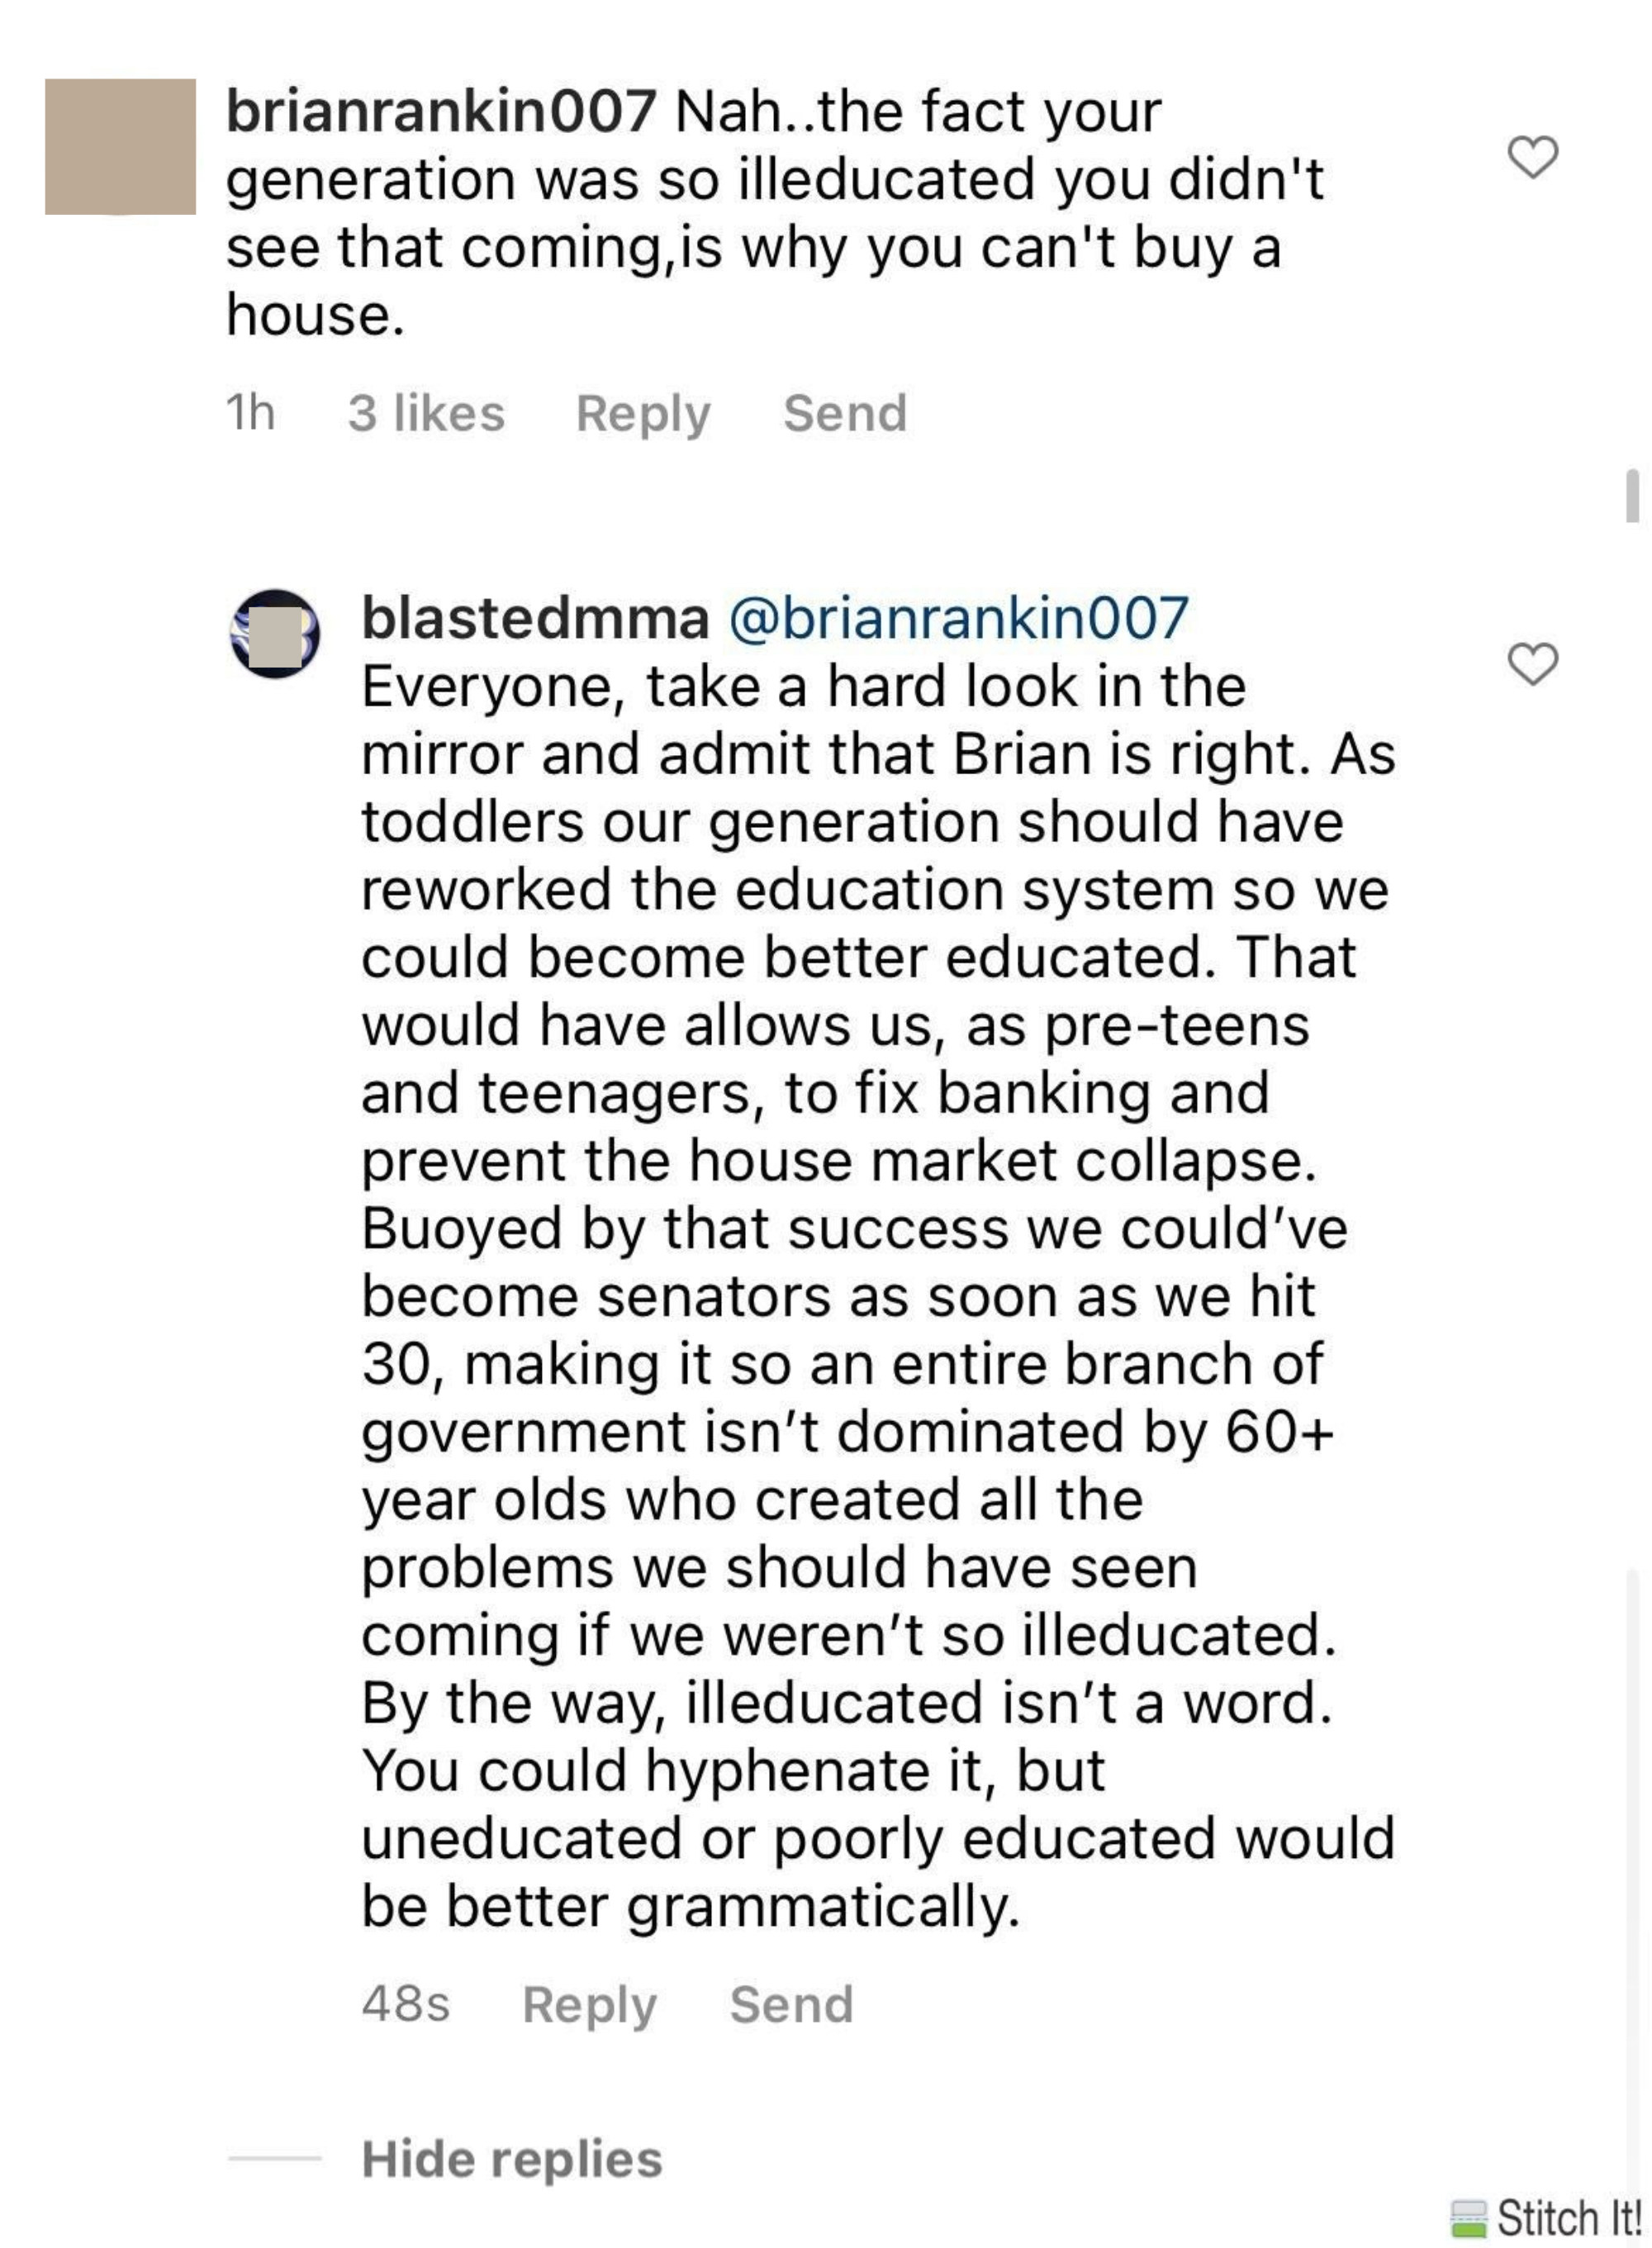 person explaining how its not millennials fault they are uneducated